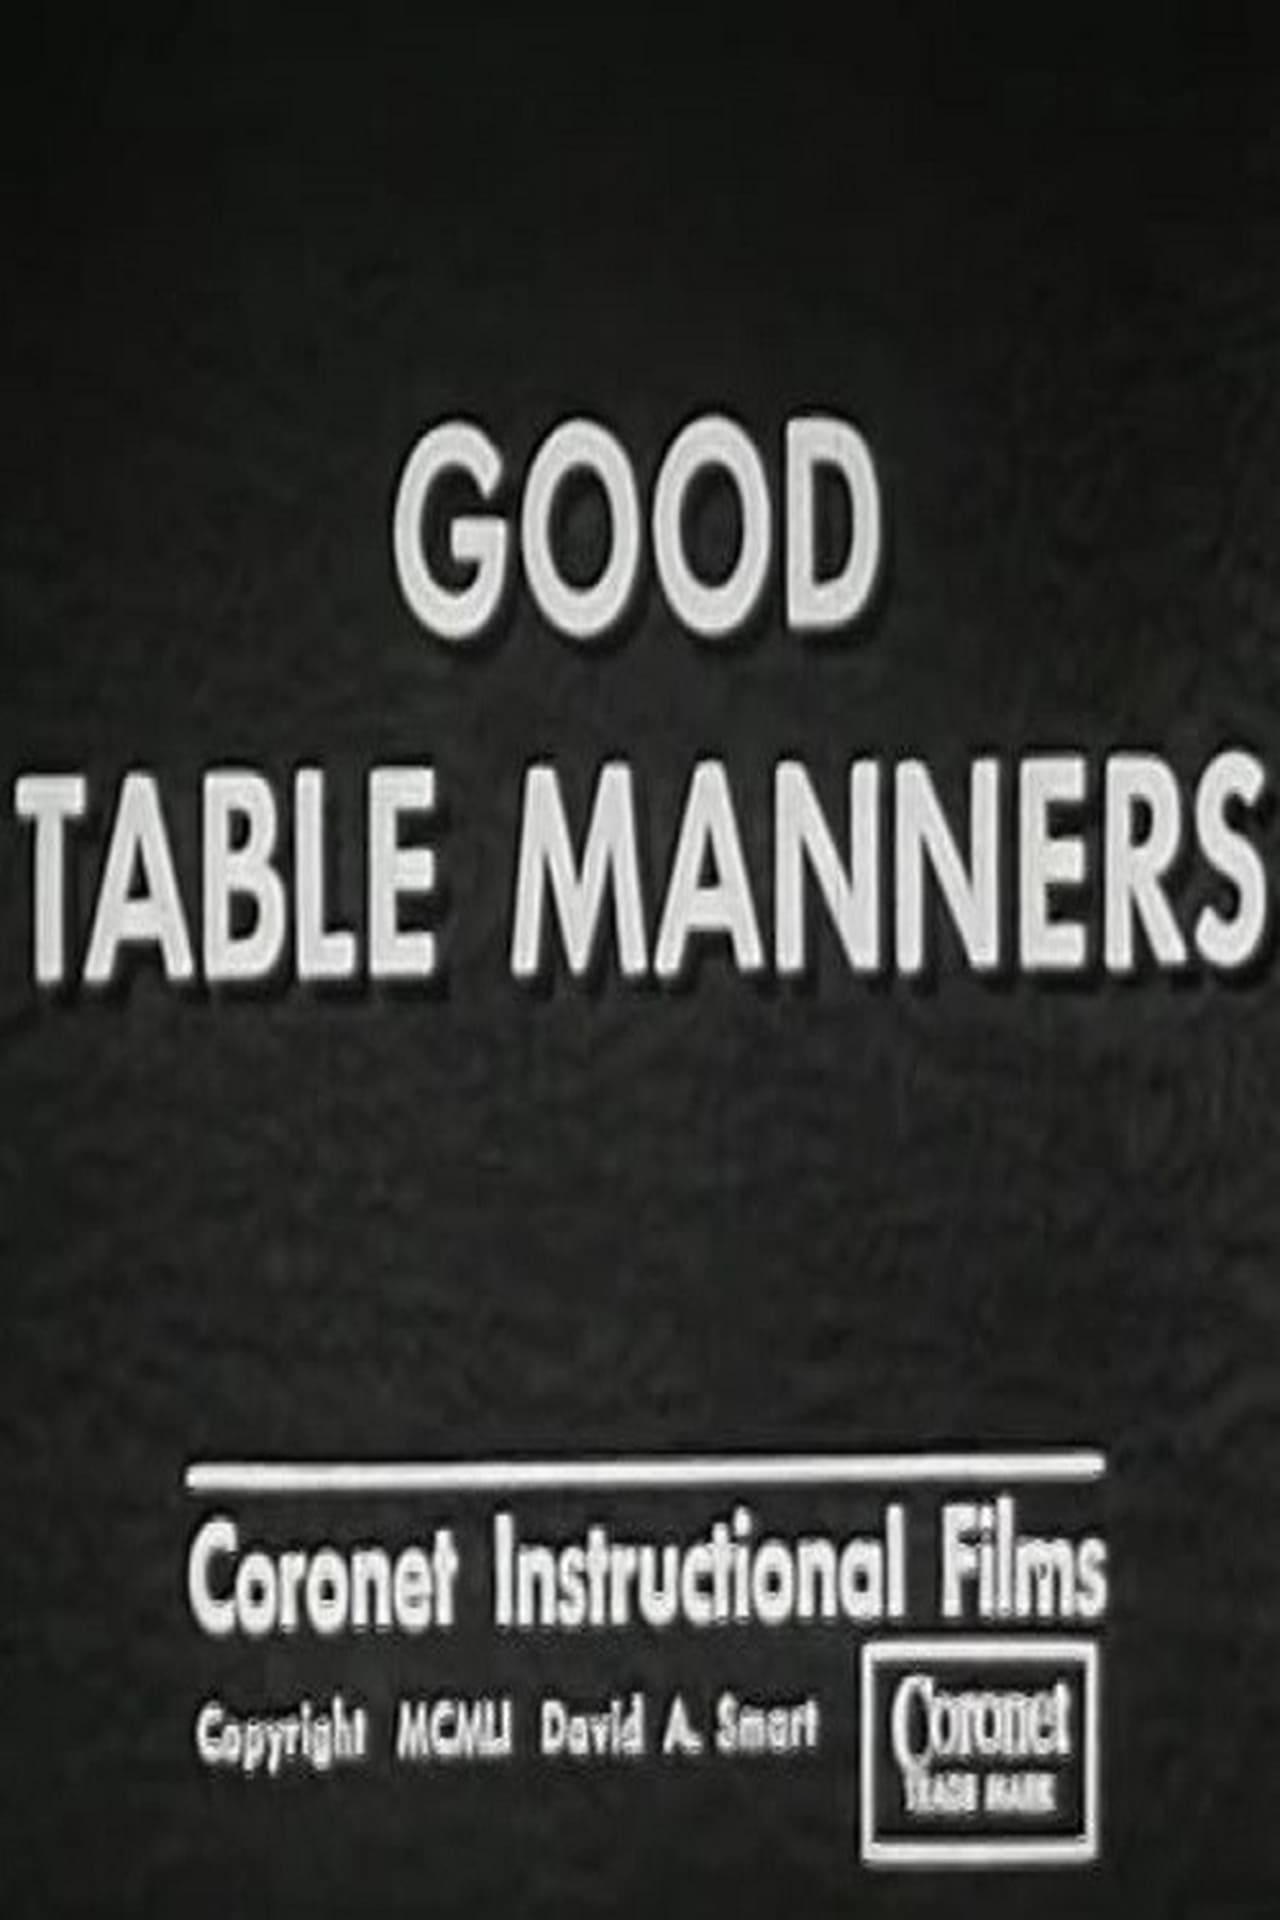 Good Table Manners poster